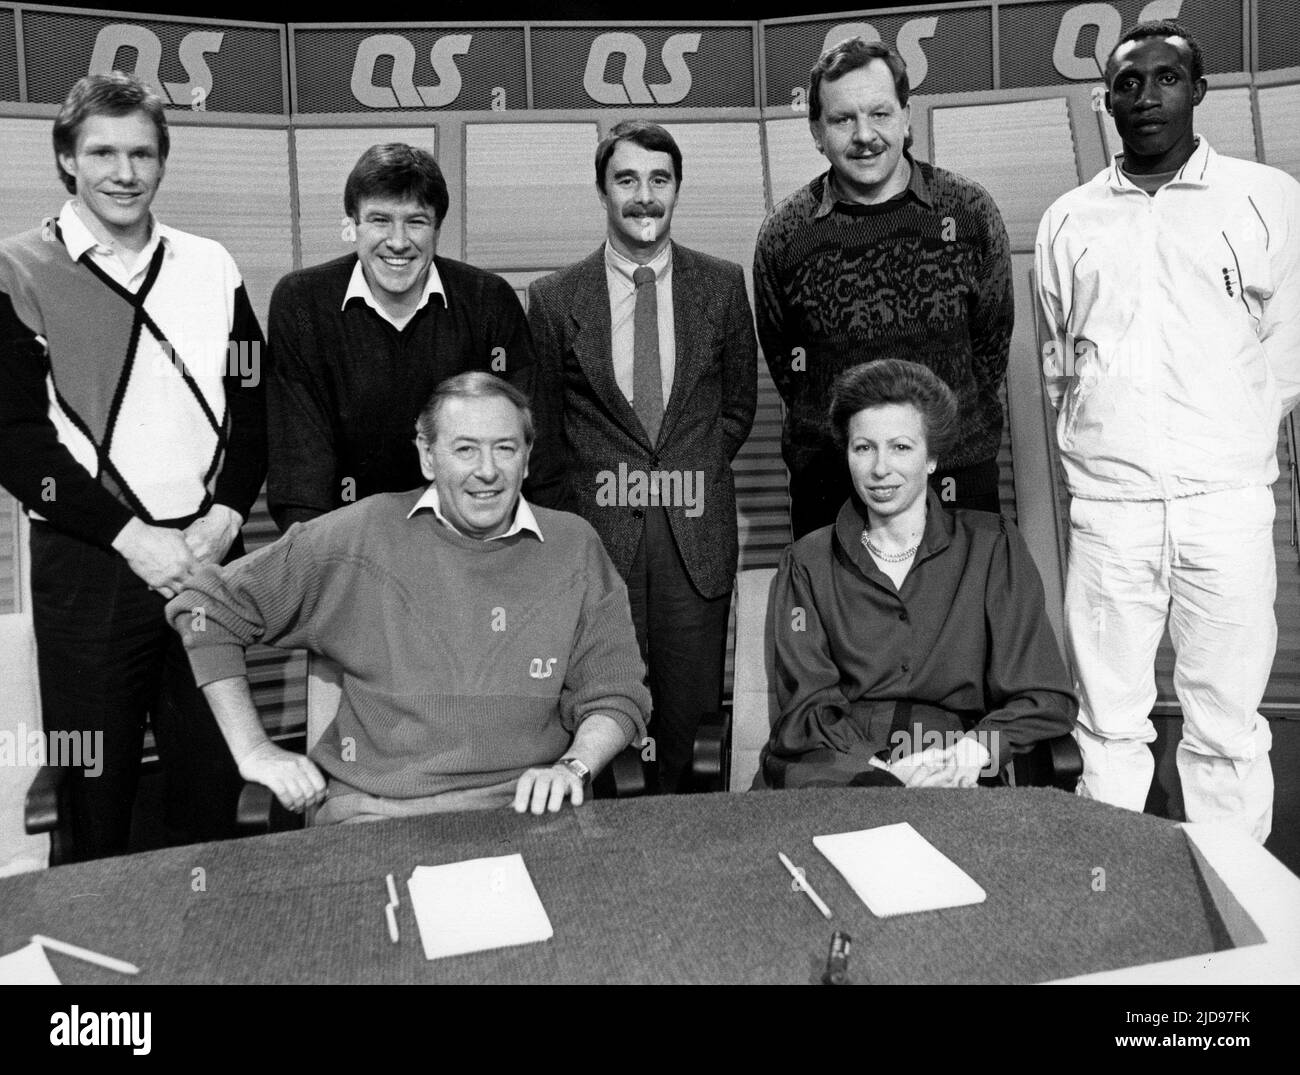 RUTHERFORD,HUGHES,MANSELL,BEAUMONT,CHRISTIE,COLEMAN,ANNE, UNA QUESTIONE DI SPORT, 1987, Foto Stock